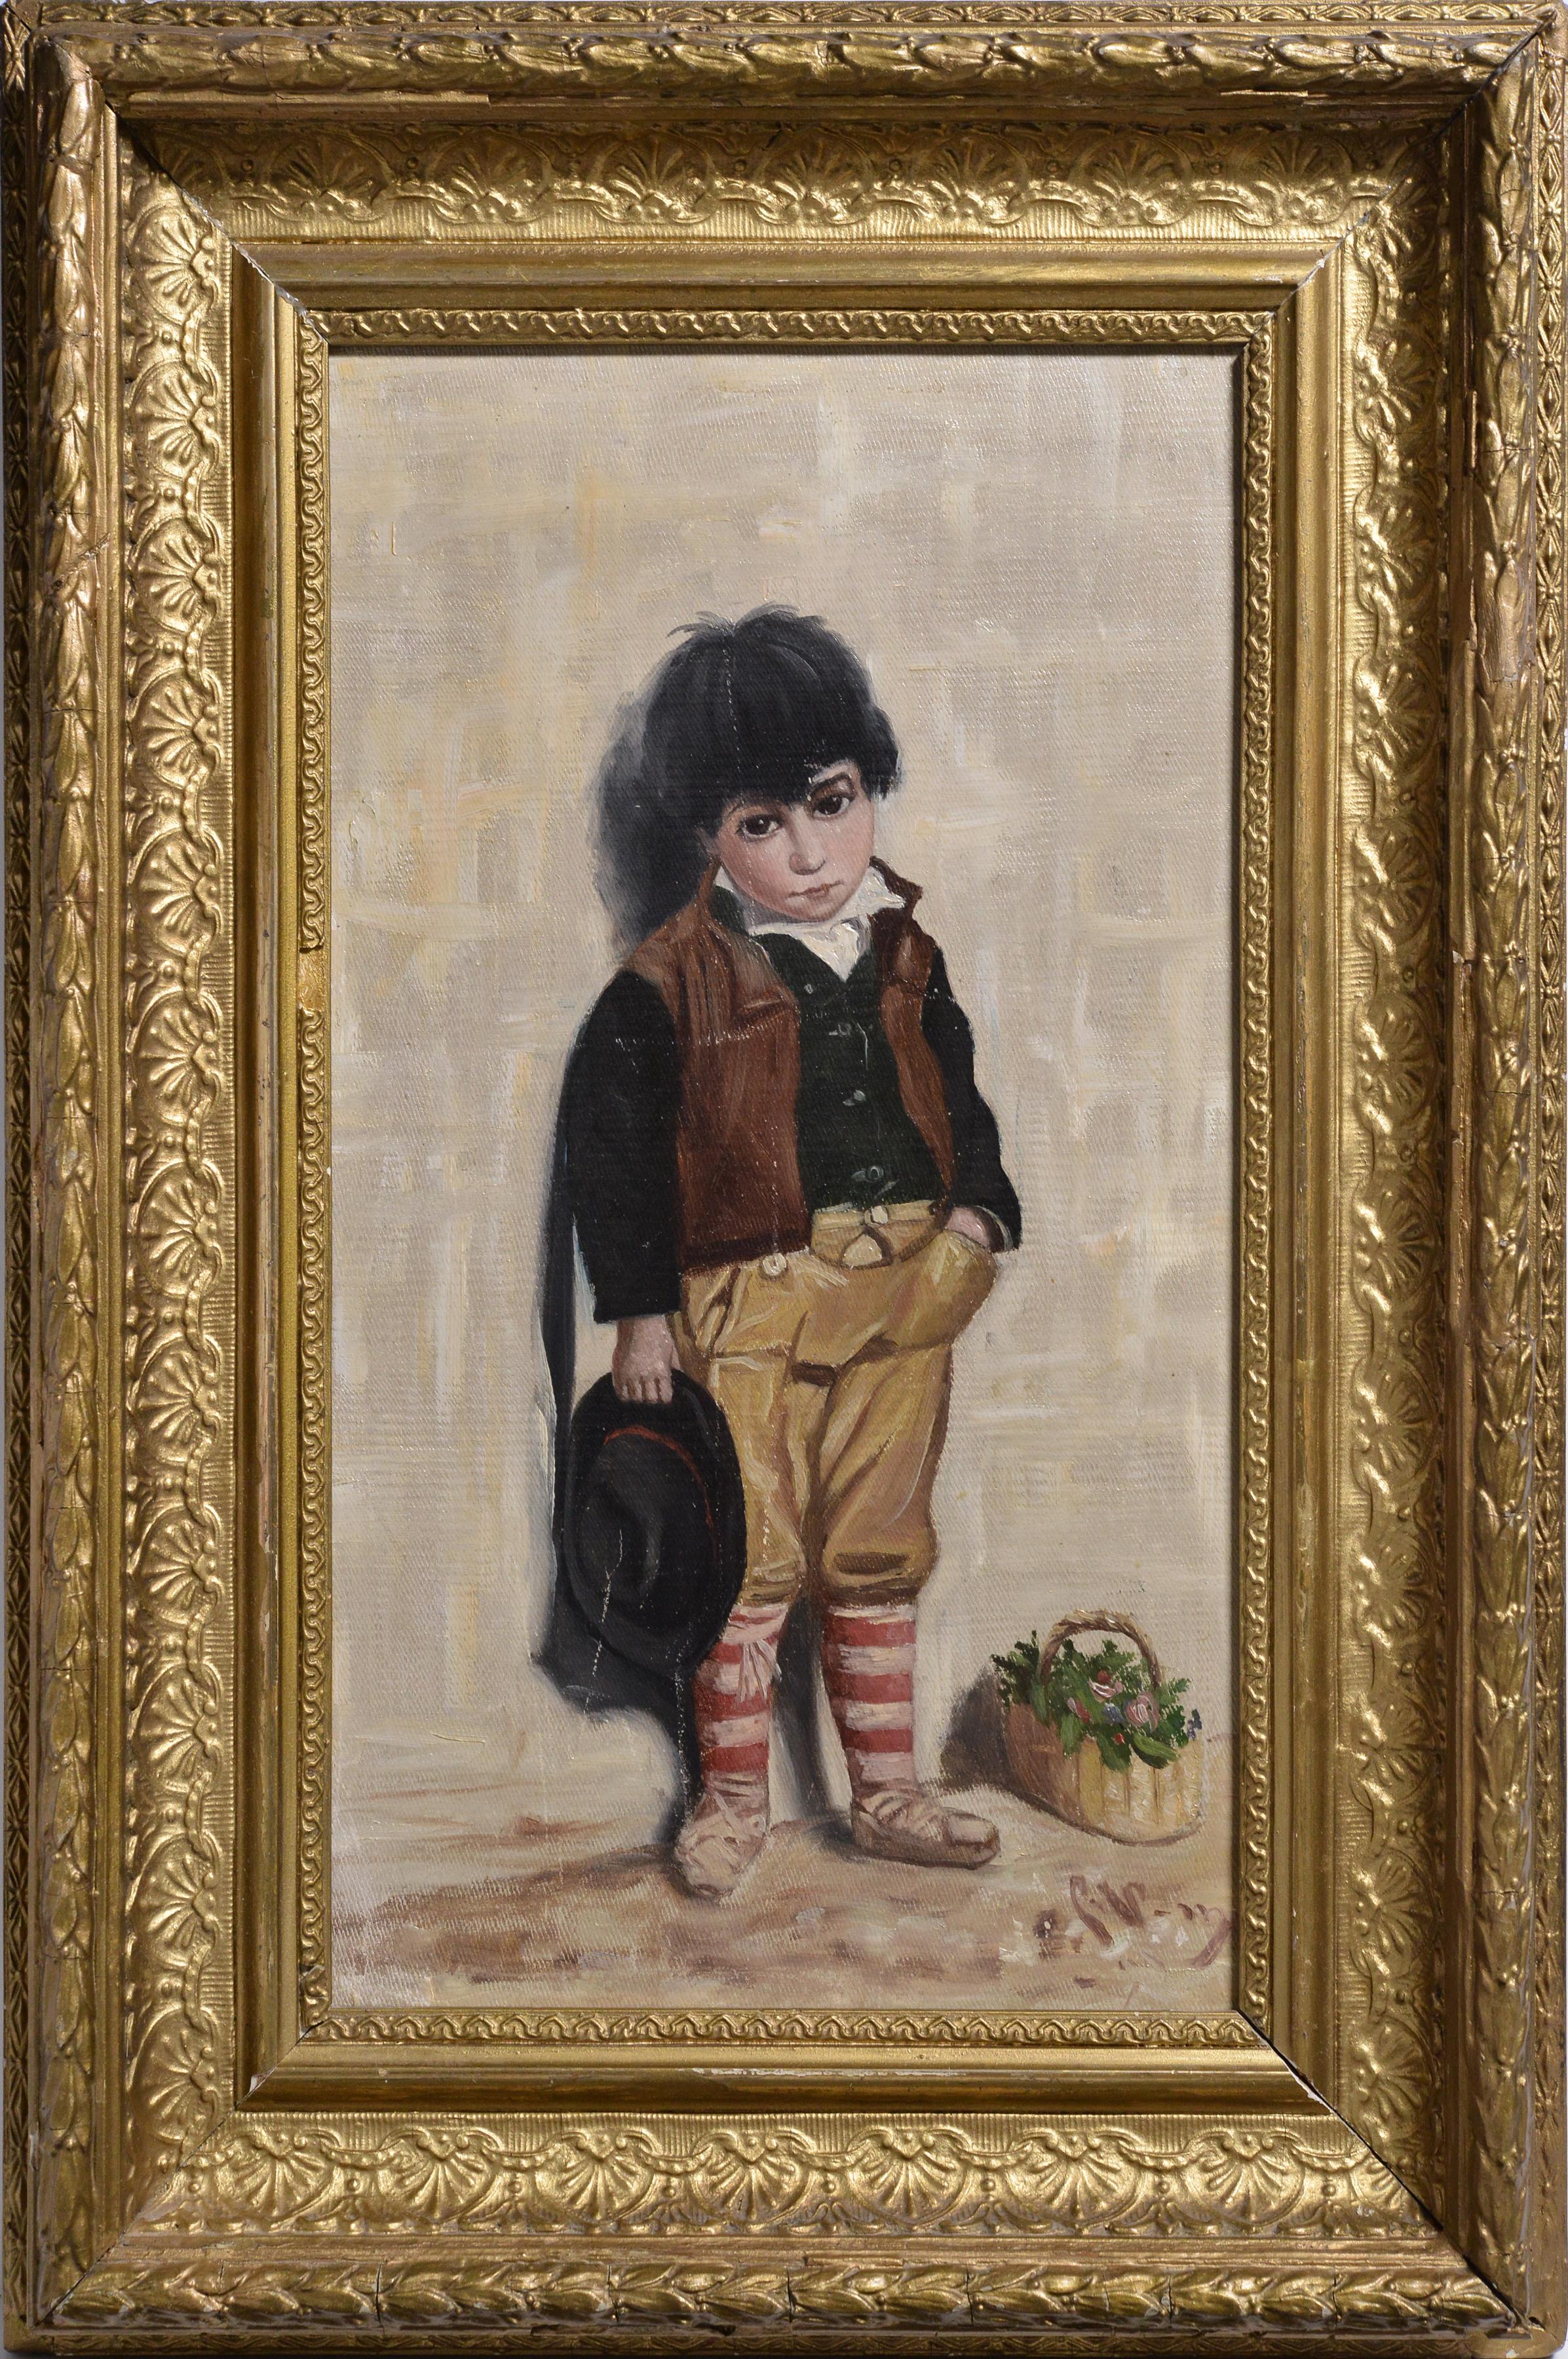 Italian Boy with Basket of Flowers 19th Century Oil Painting Signed Framed